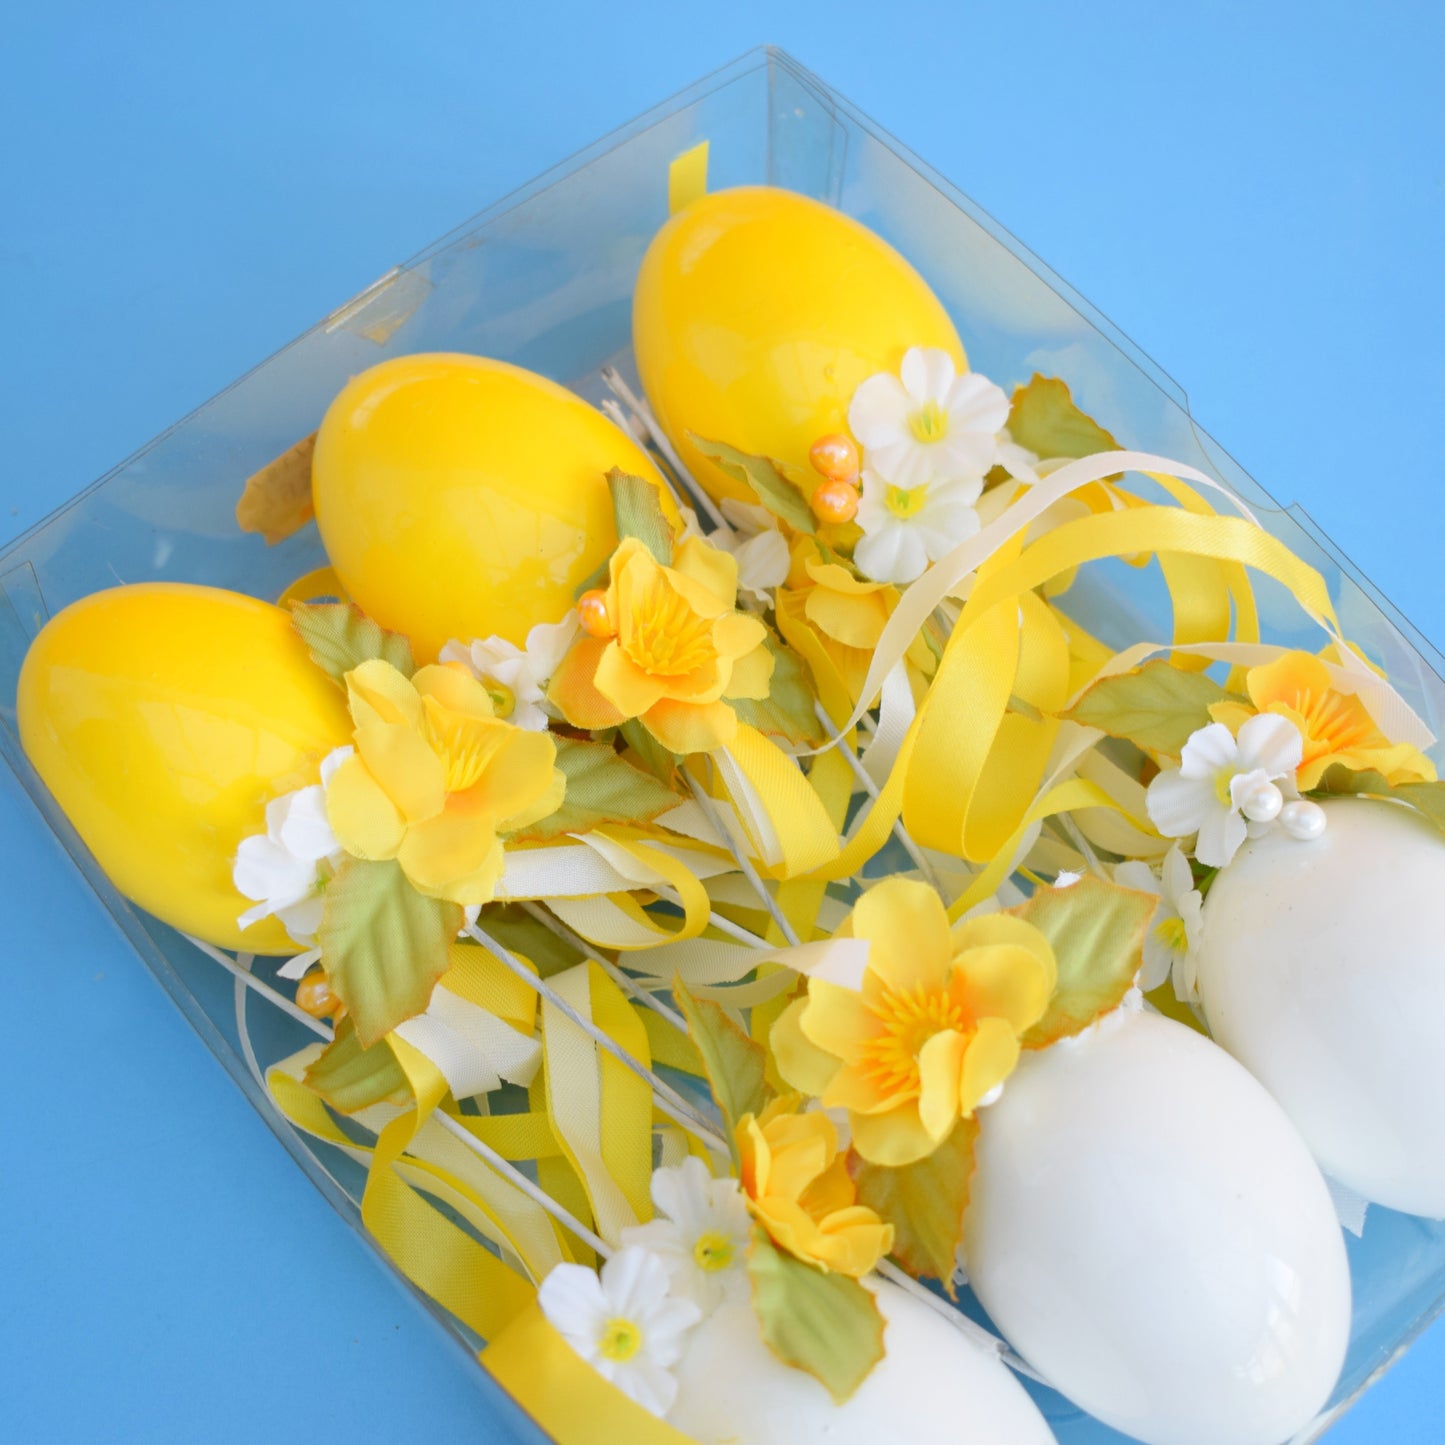 Vintage 1970s Egg Decorations- Yellow / White - Boxed